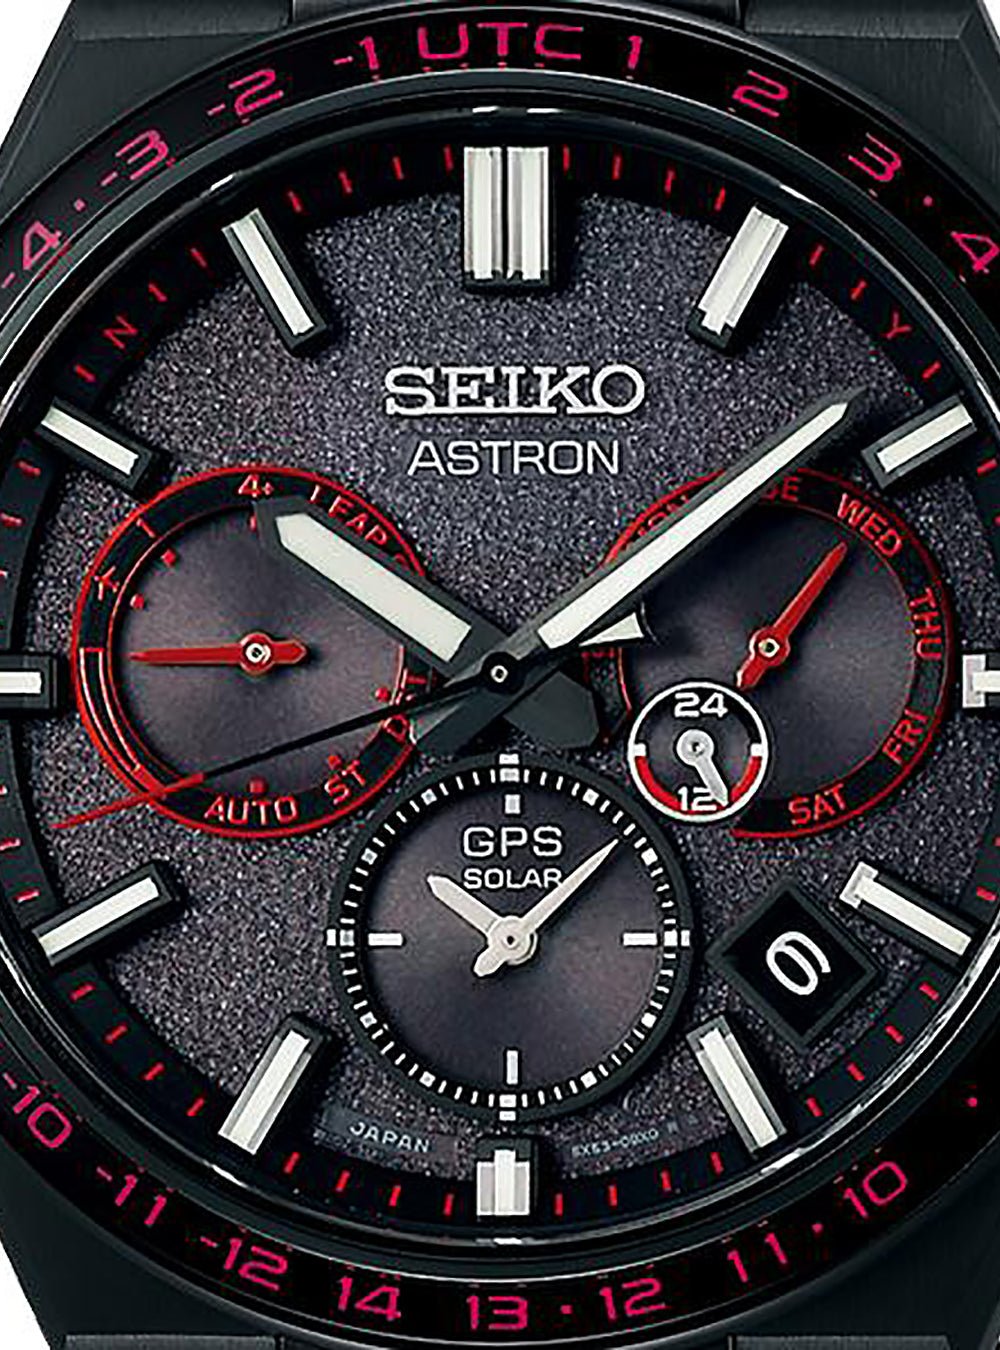 SEIKO ASTRON NEXTER GPS SOLAR 2023 LIMITED EDITION SBXC137 MADE IN JAPAN JDM